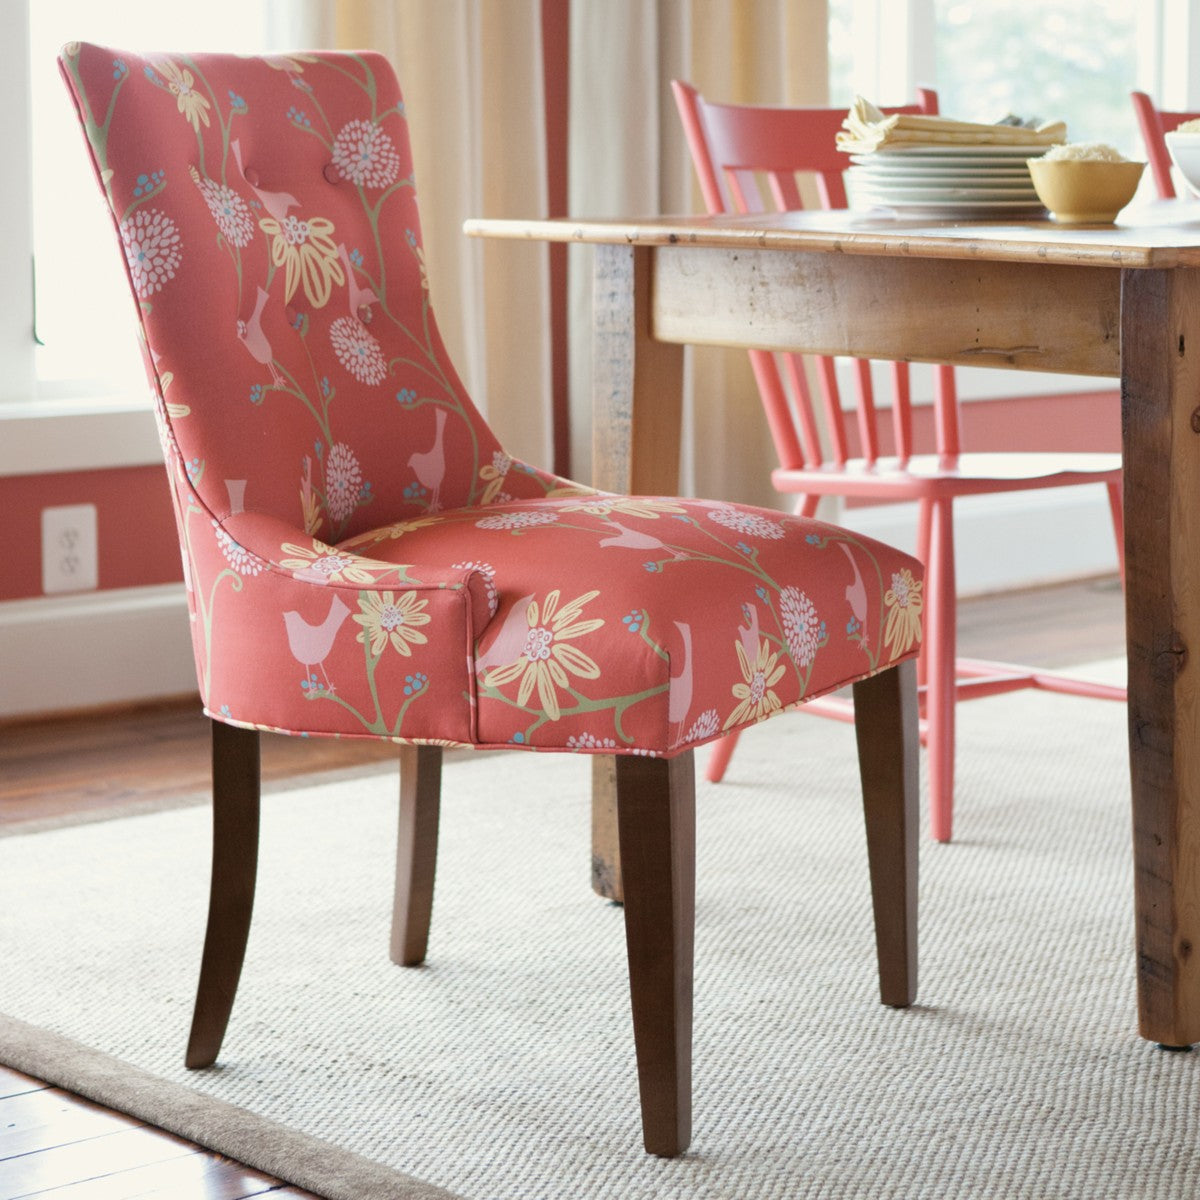 Maine Cottage Jill Dining Chair | Curvy Coastal Dining Chair | Upholstered  